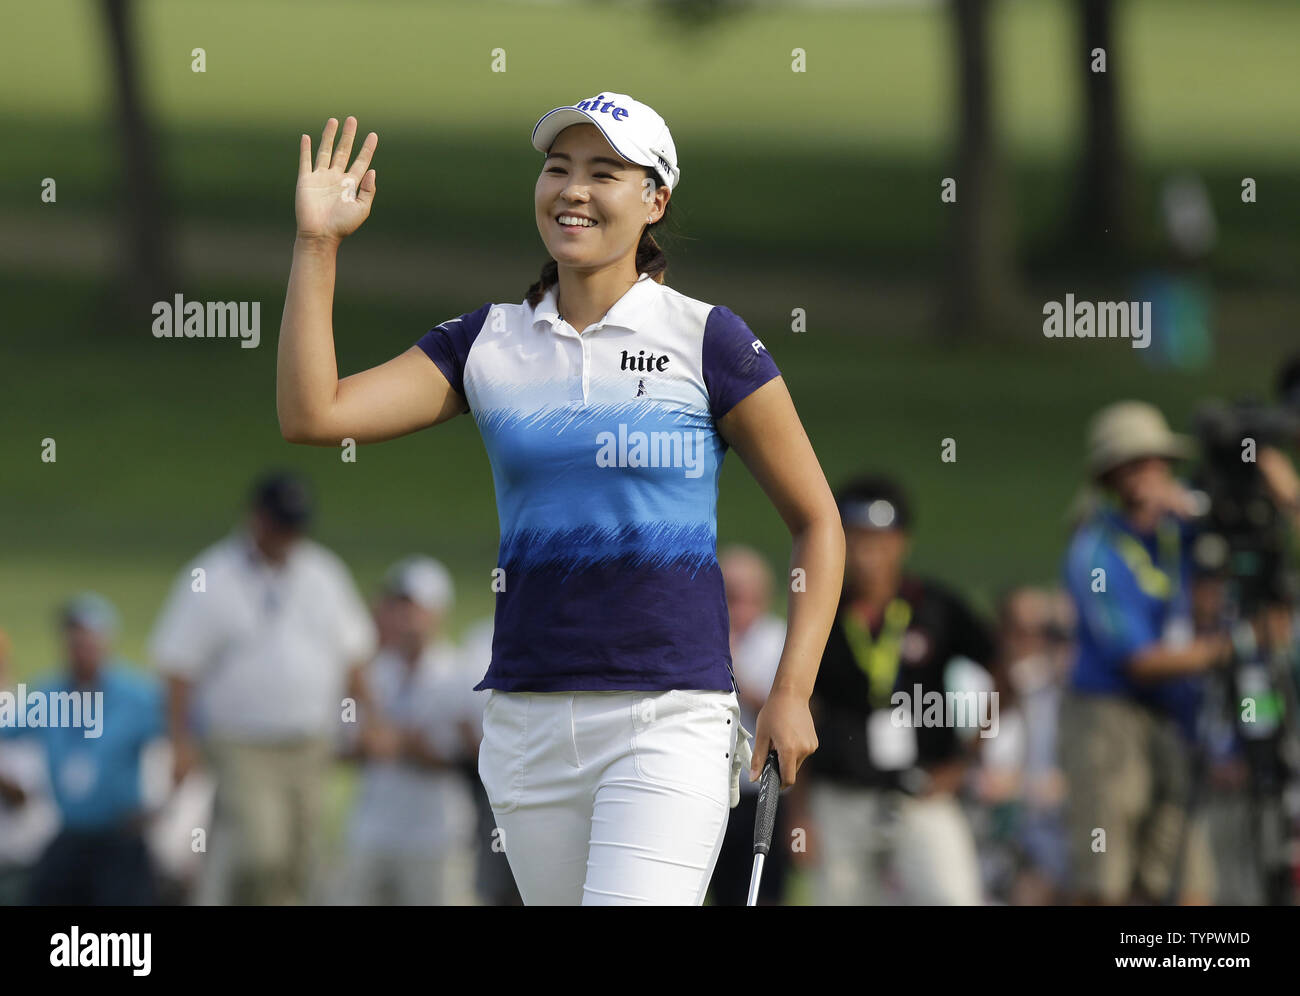 In Gee Chun of Korea smiles as she walks off of the 16th green after making a birdie putt in the final round of the LPGA U.S. Women's Open Championship at Lancaster Country Club in Lancaster, PA on July 12, 2015. Chun wins the U.S. Women's Open and her first LPGA major championship with a score of 8 under par.     Photo by John Angelillo/UPI Stock Photo